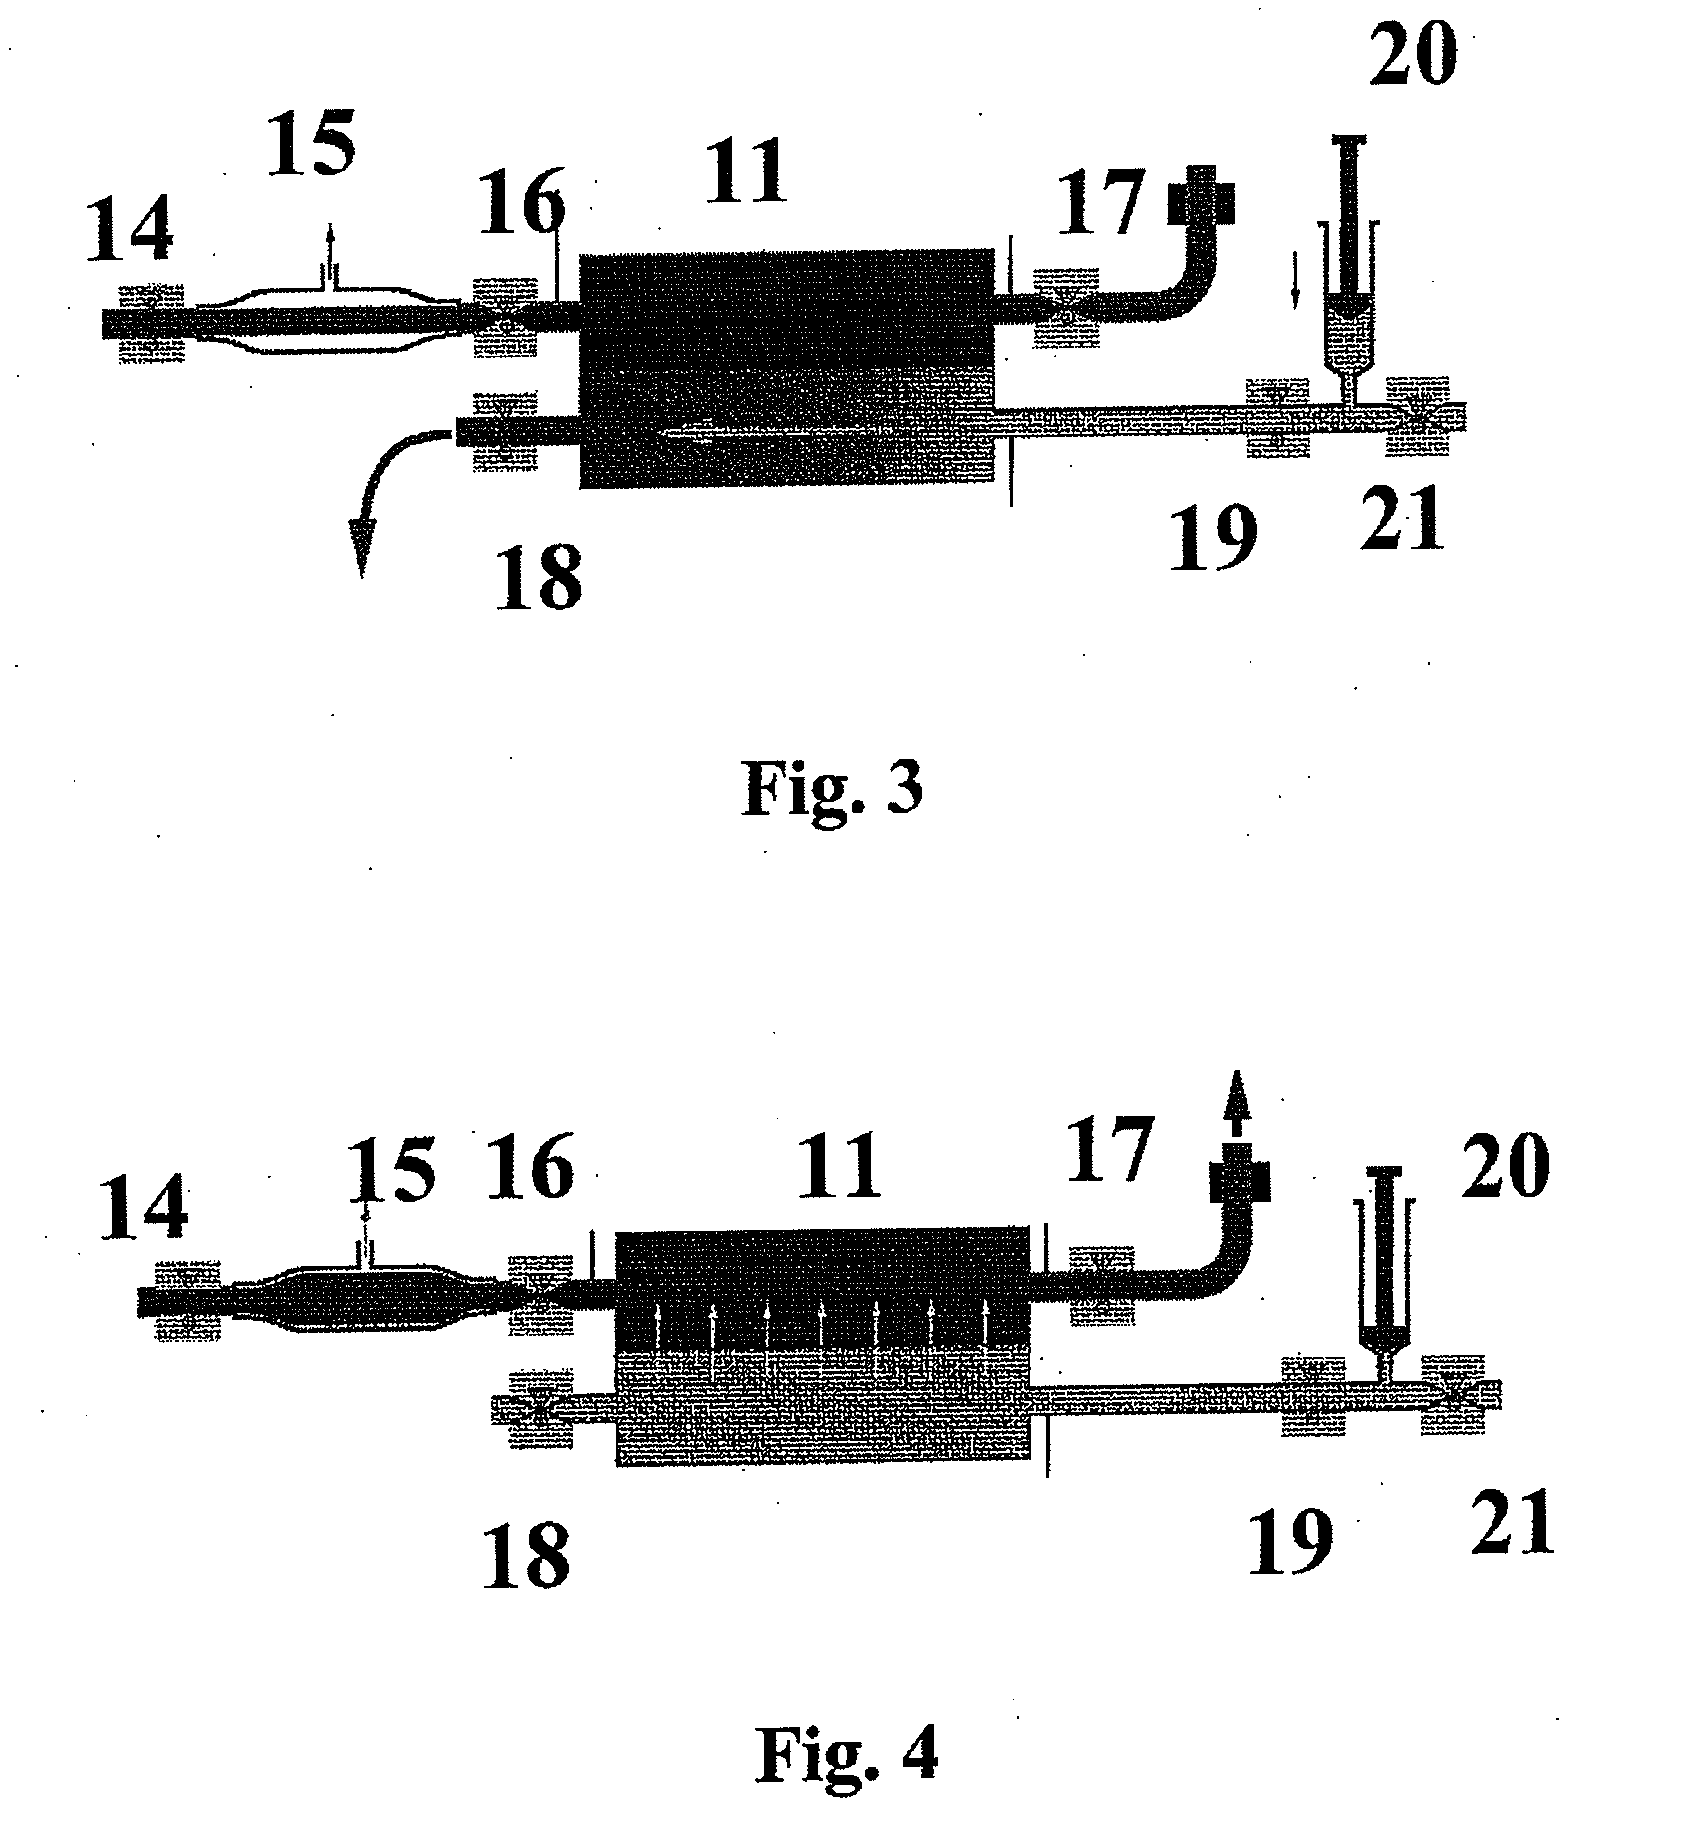 Haemodialfiltration method and apparatus